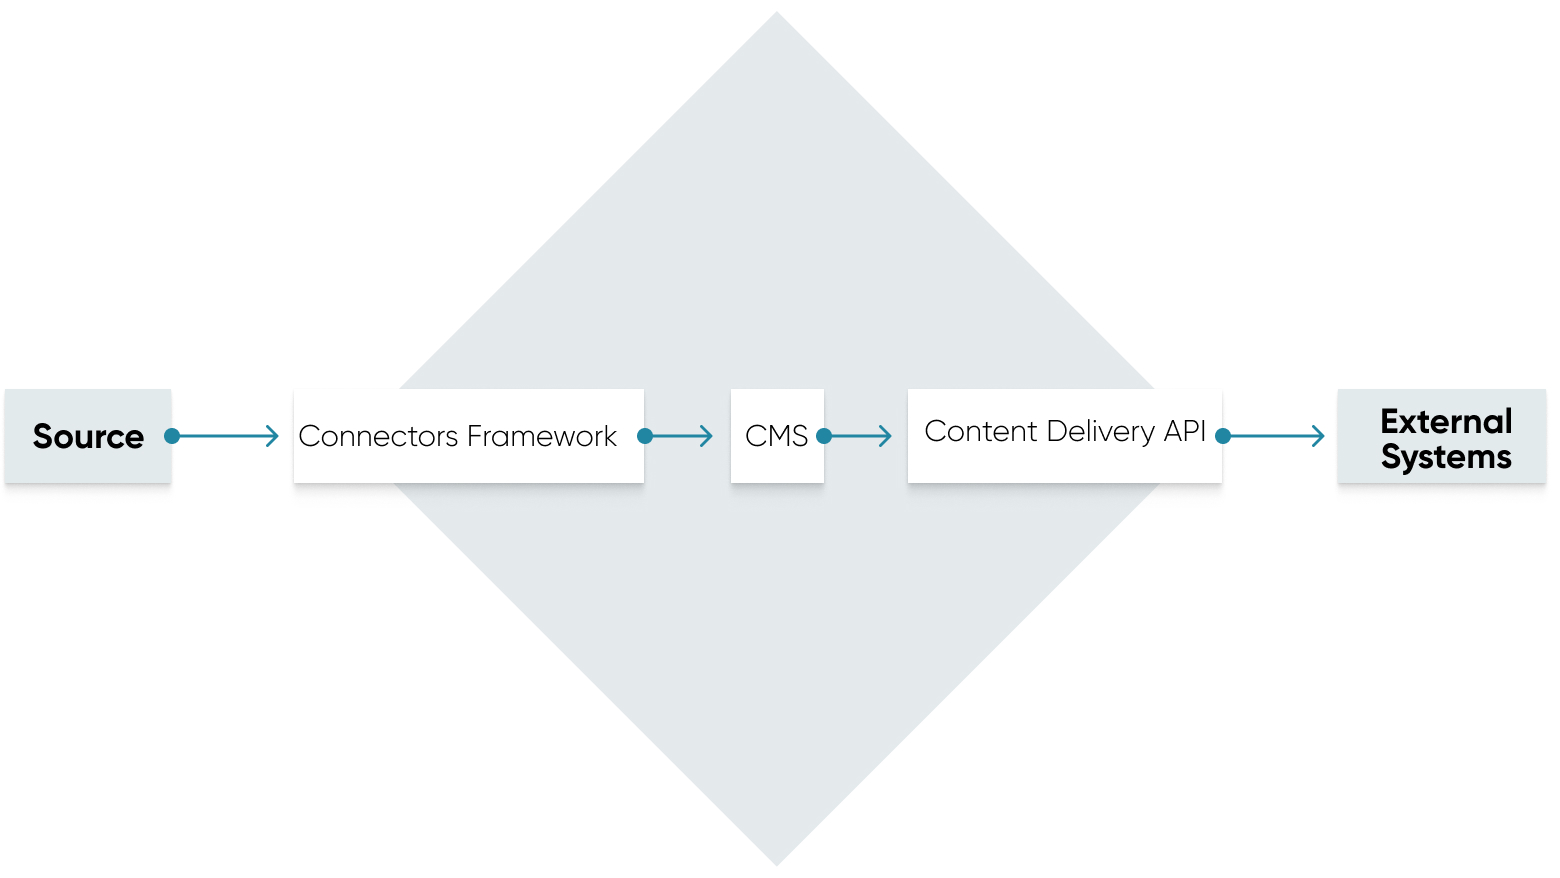 Data Moves from Source to Connectors Framework to CMS to Content Delivery API to External Systems